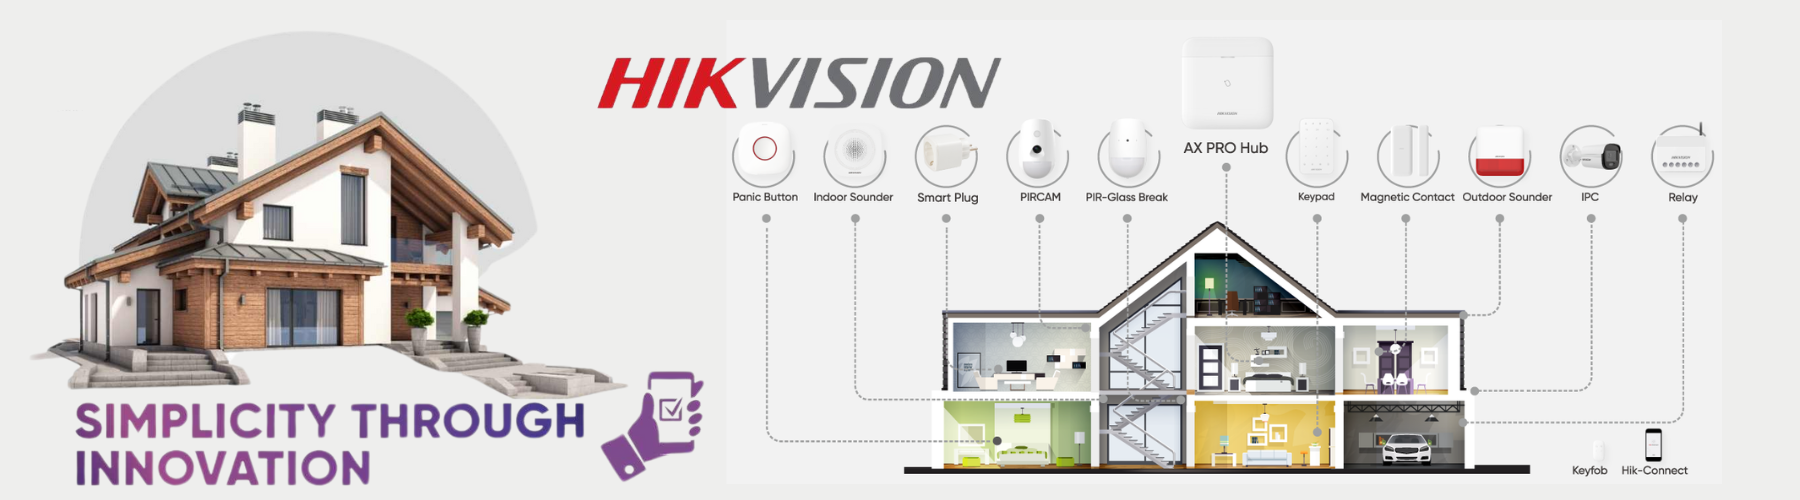 Hikvision-Home-Alarm-System_1-CTC Communications